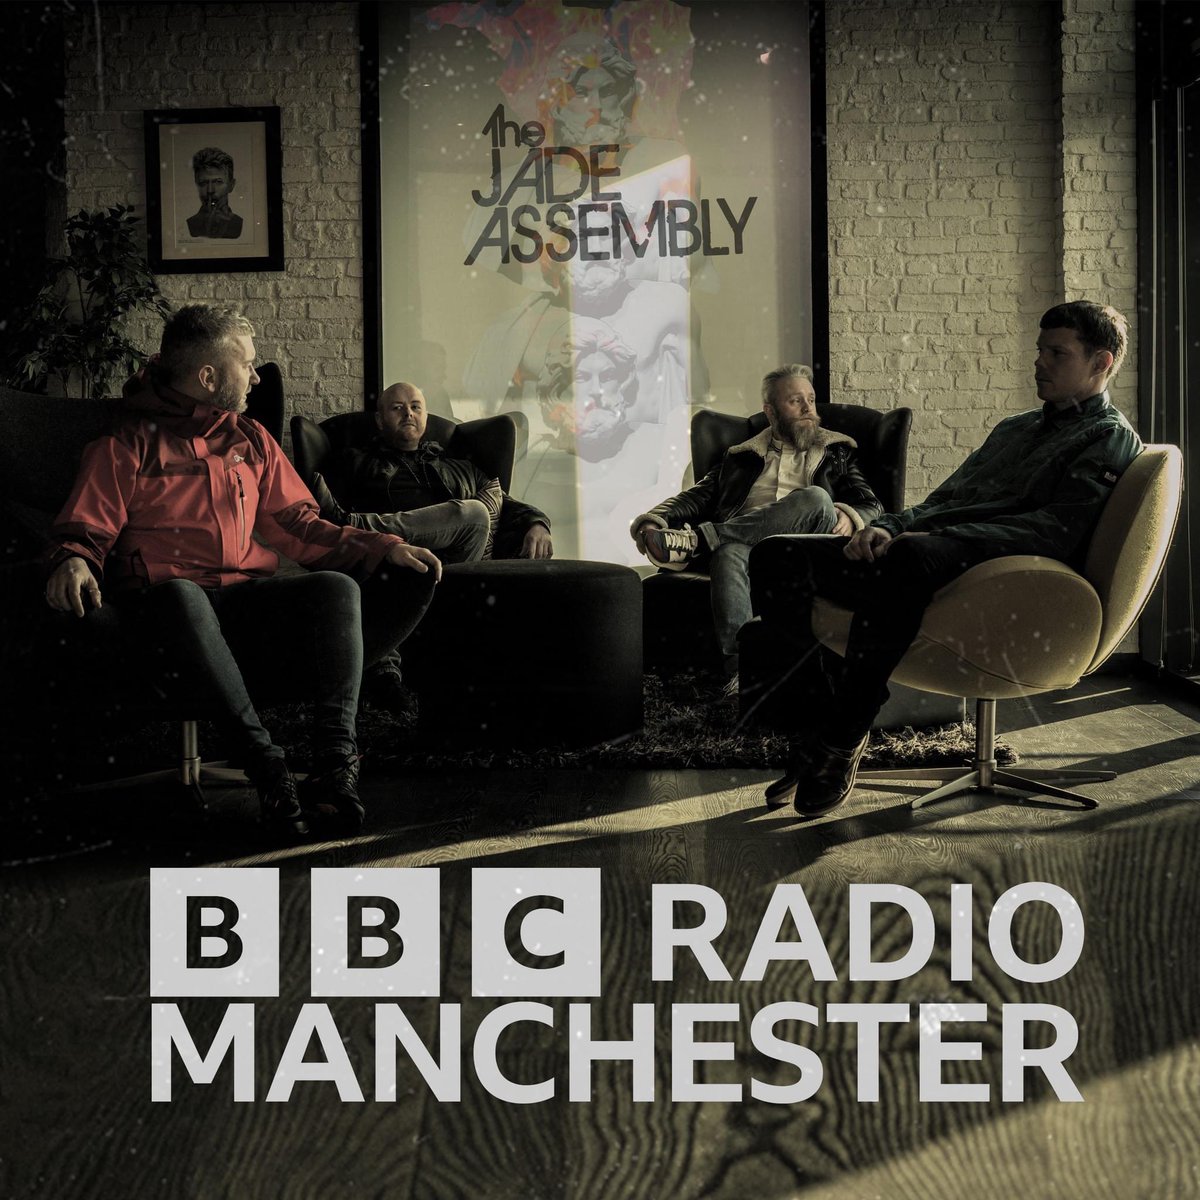 Catch our latest Single 'Vulcan' on @BBCRadioManc and Drummer @watsontja in interview with the host @arghkid at approx. 18:40 on Sat 27th May! TJA x